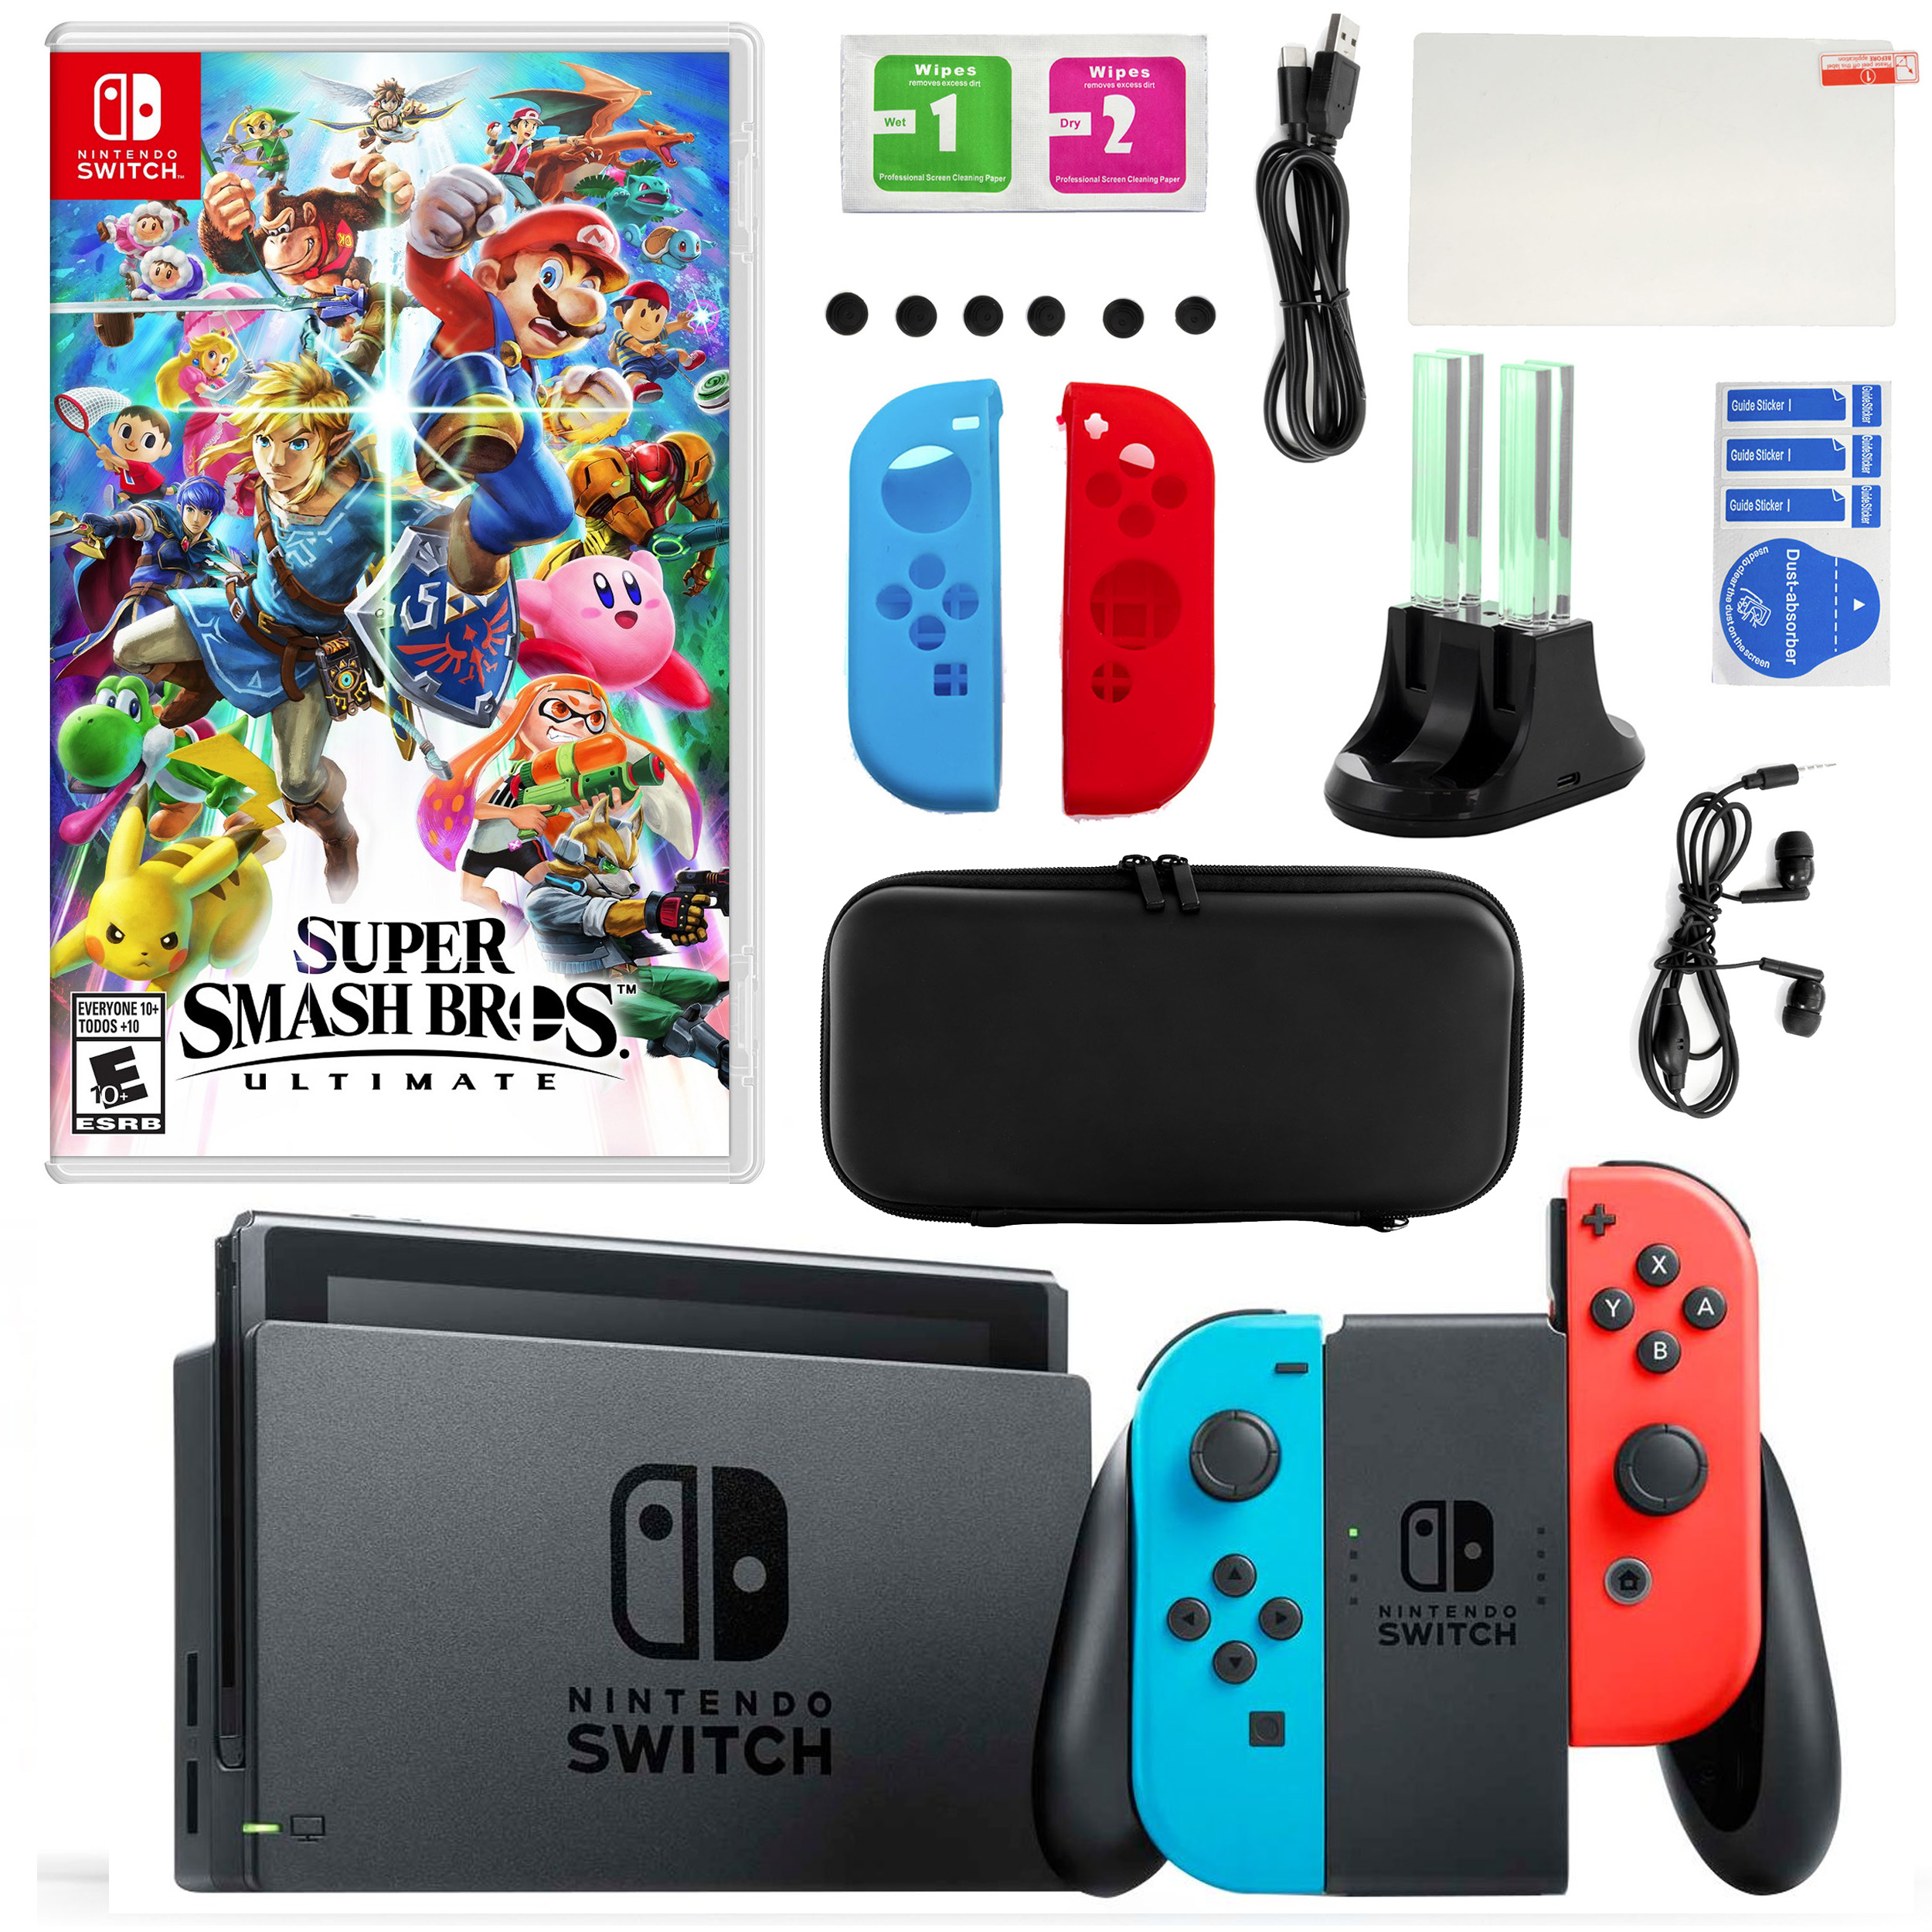 Nintendo Switch in Neon with Super Smash Bros and Accessories Kit - image 1 of 1